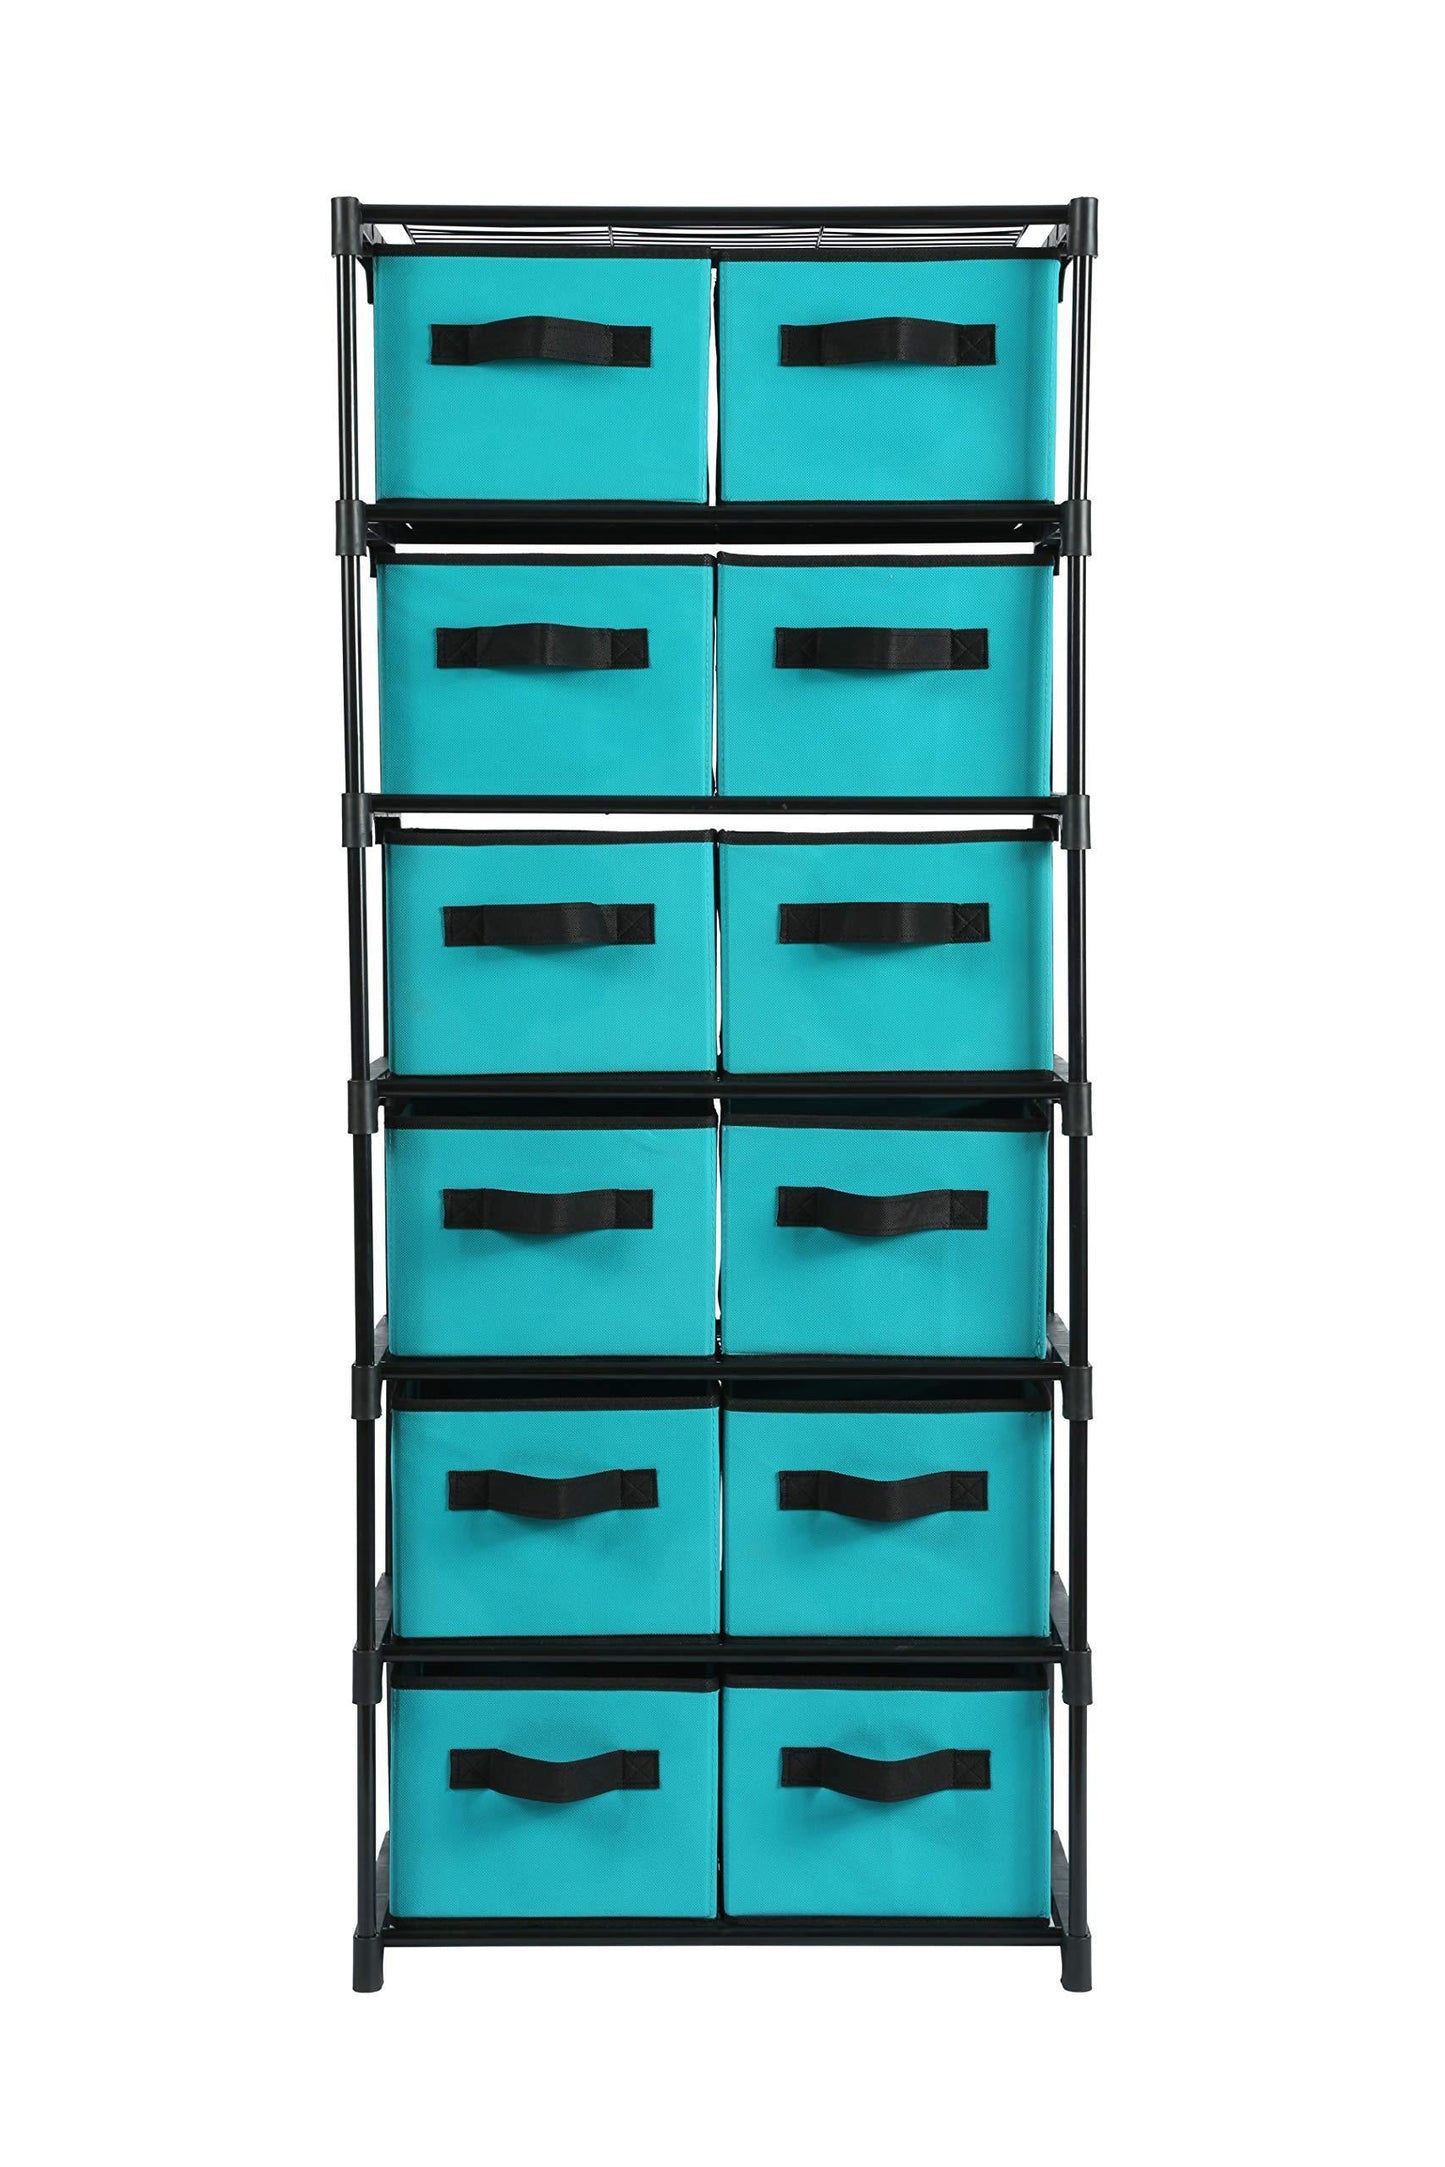 Results homebi storage chest shelf unit 12 drawer storage cabinet with 6 tier metal wire shelf and 12 removable non woven fabric bins in turquoise 20 67w x 12d x49 21h